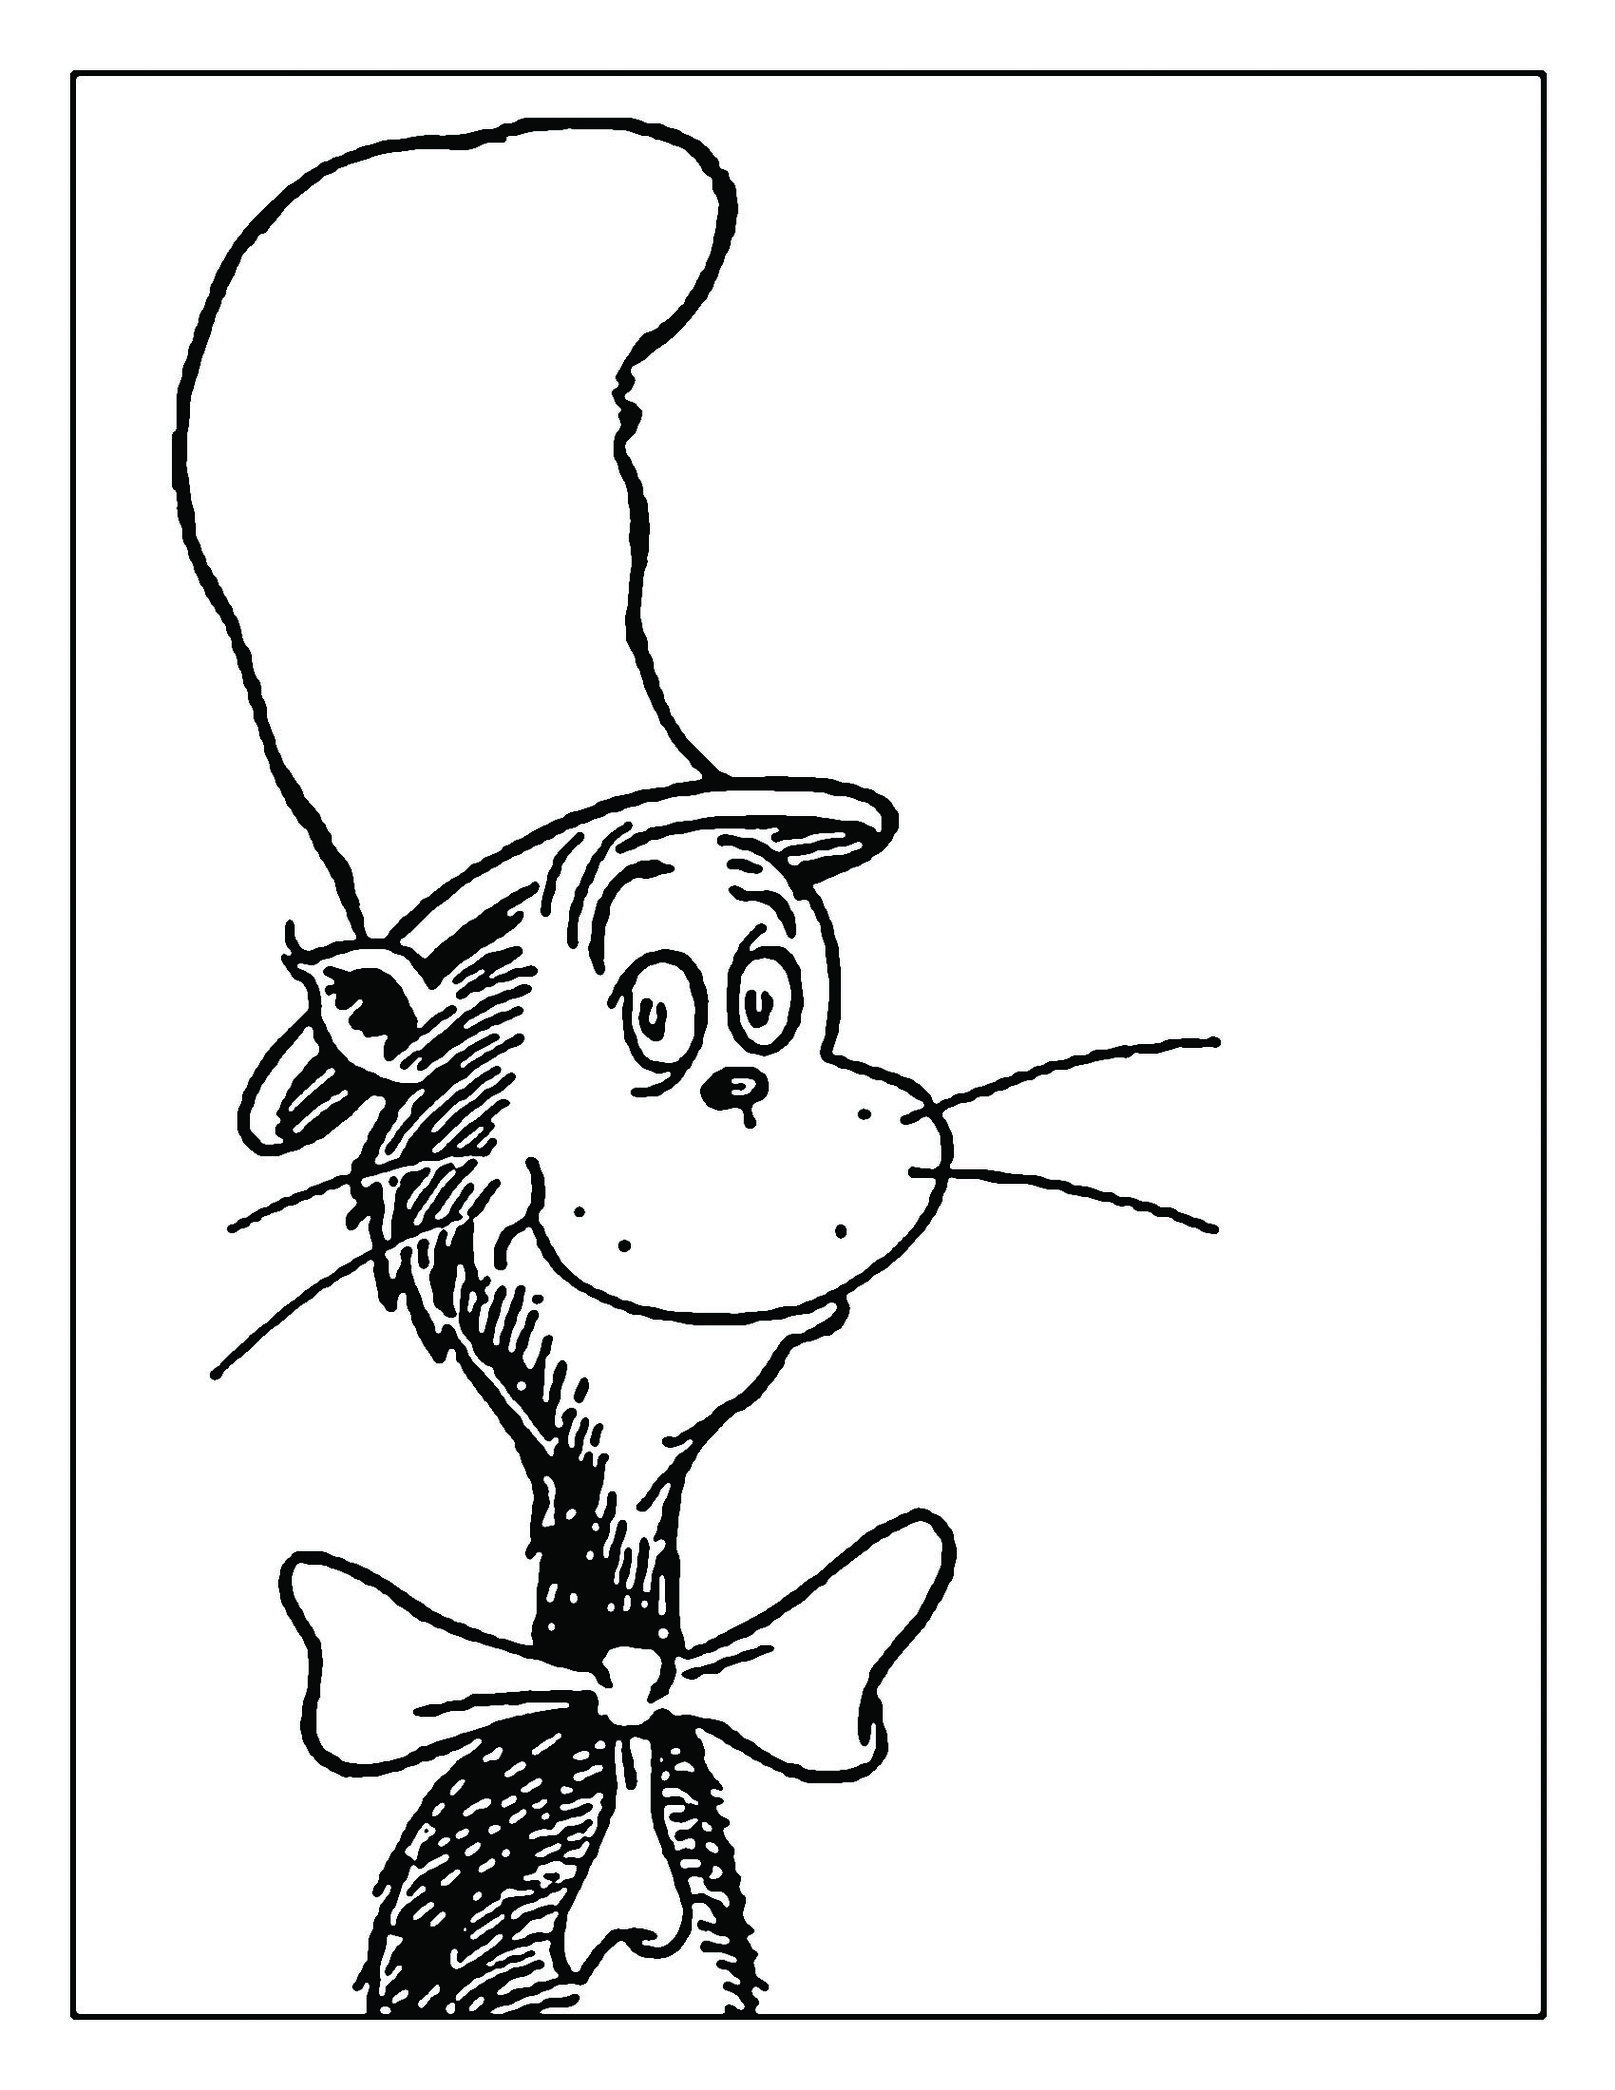 Dr Seuss Stencil Clipart - Free to use Clip Art Resource